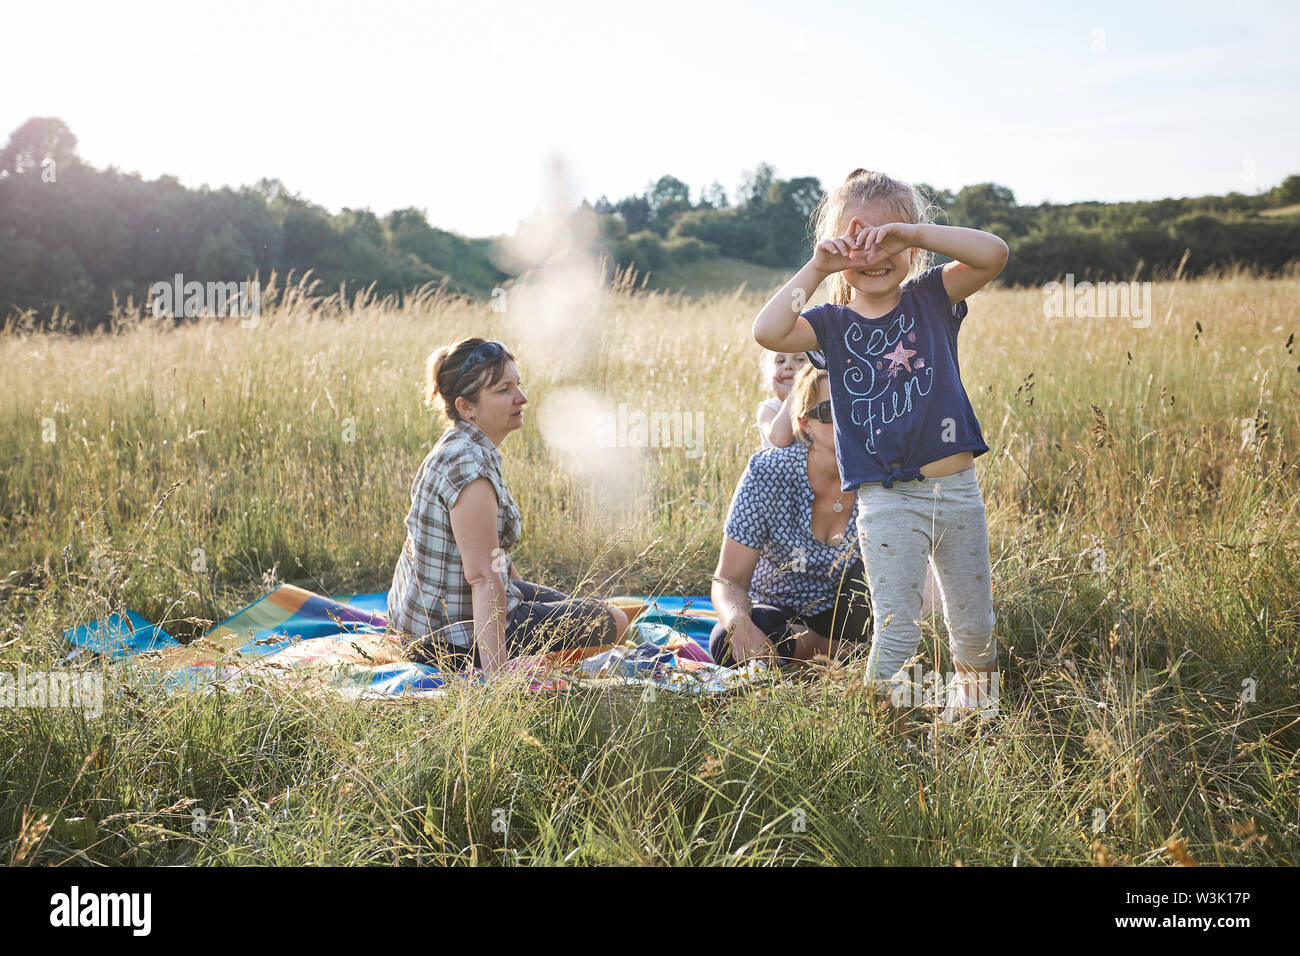 Little girl making a hand gesture for taking picture. Family spending time together on a meadow, close to nature. Parents and kids sitting on a blanke Stock Photo